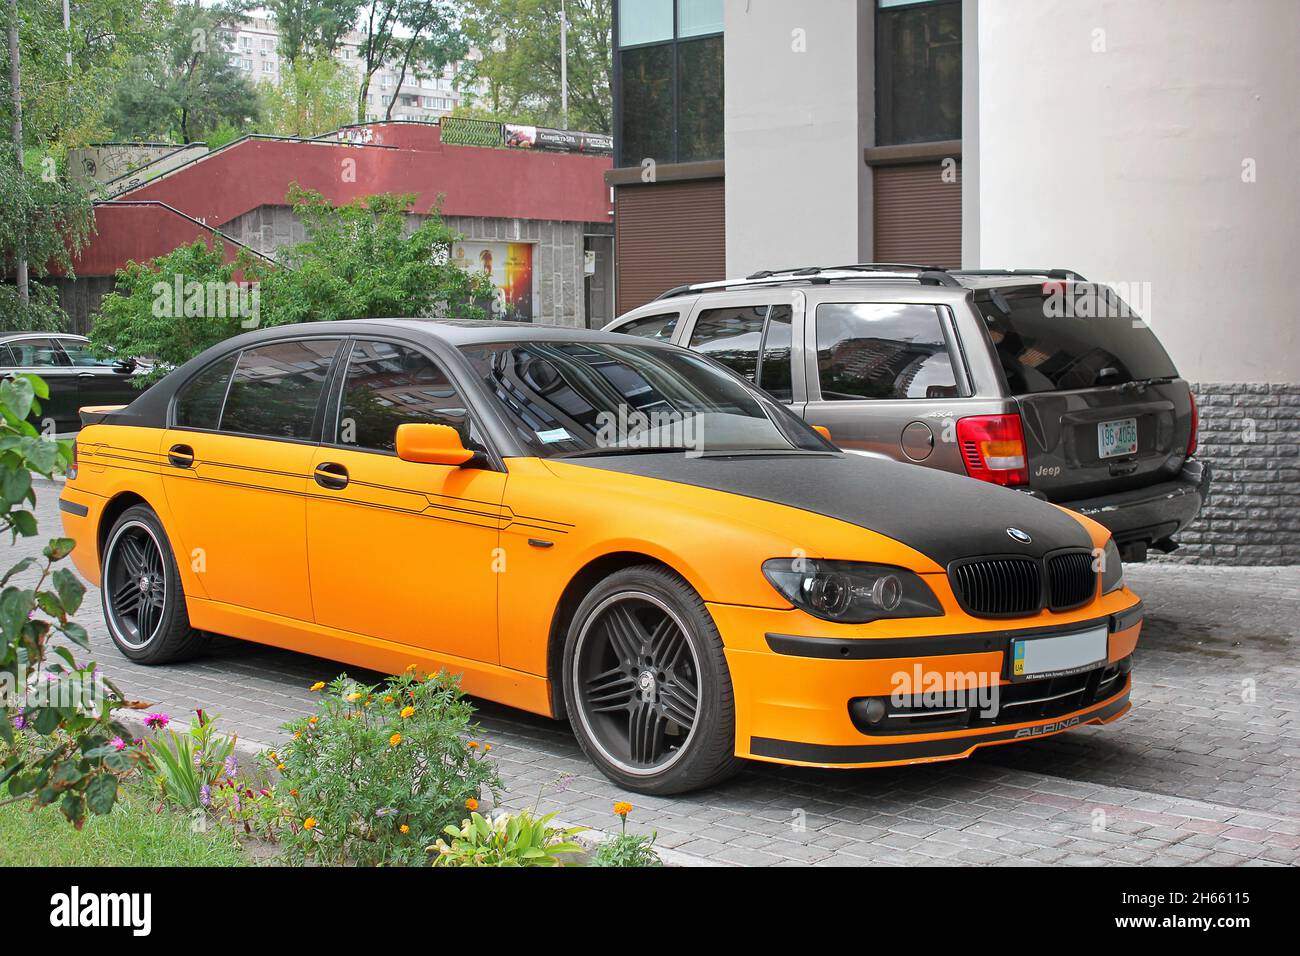 Kiev, Ukraine - September 2, 2017: BMW 7 Series Alpina in an orange matte film against the background of other cars and a house Stock Photo